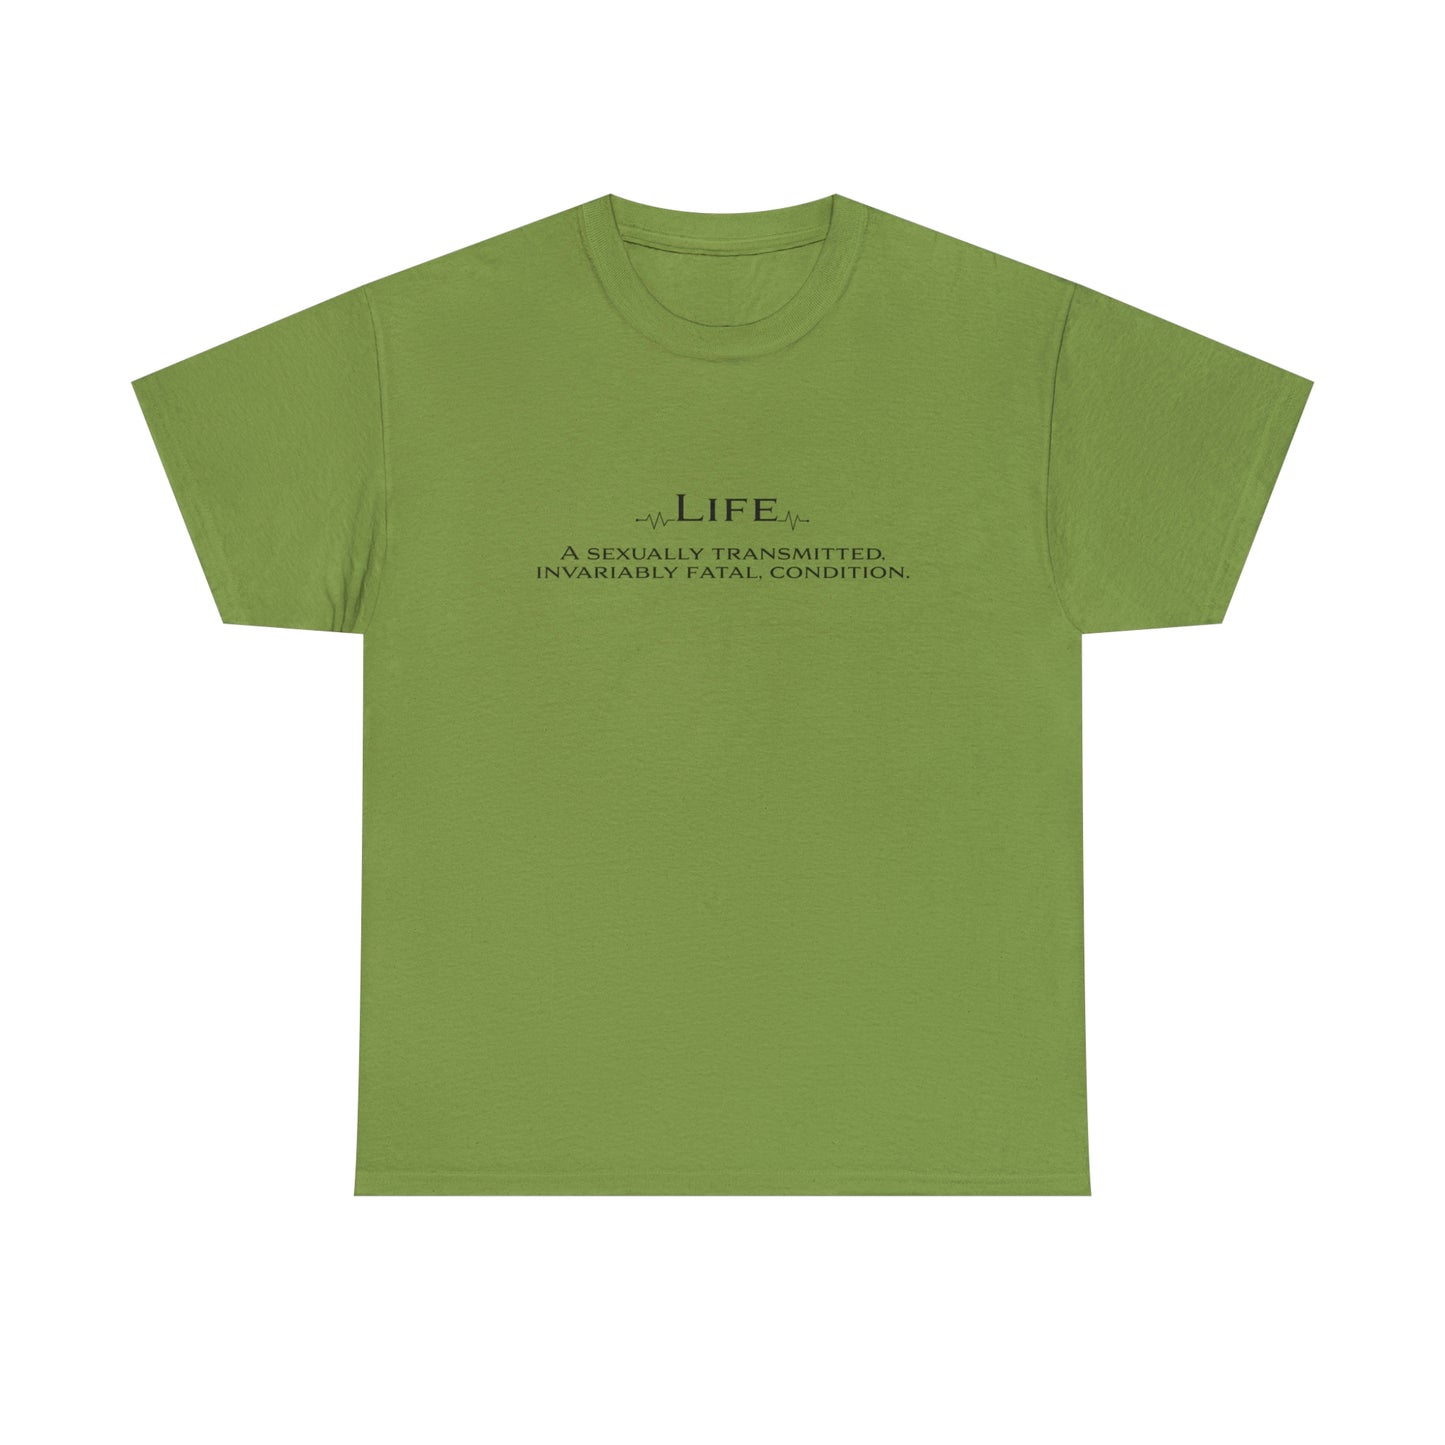 Life DefinitionT-Shirt For Life TShirt For Ironic T Shirt For Life and Death Shirt For Sarcastic Tee For Sarcastic  Gift TShirt